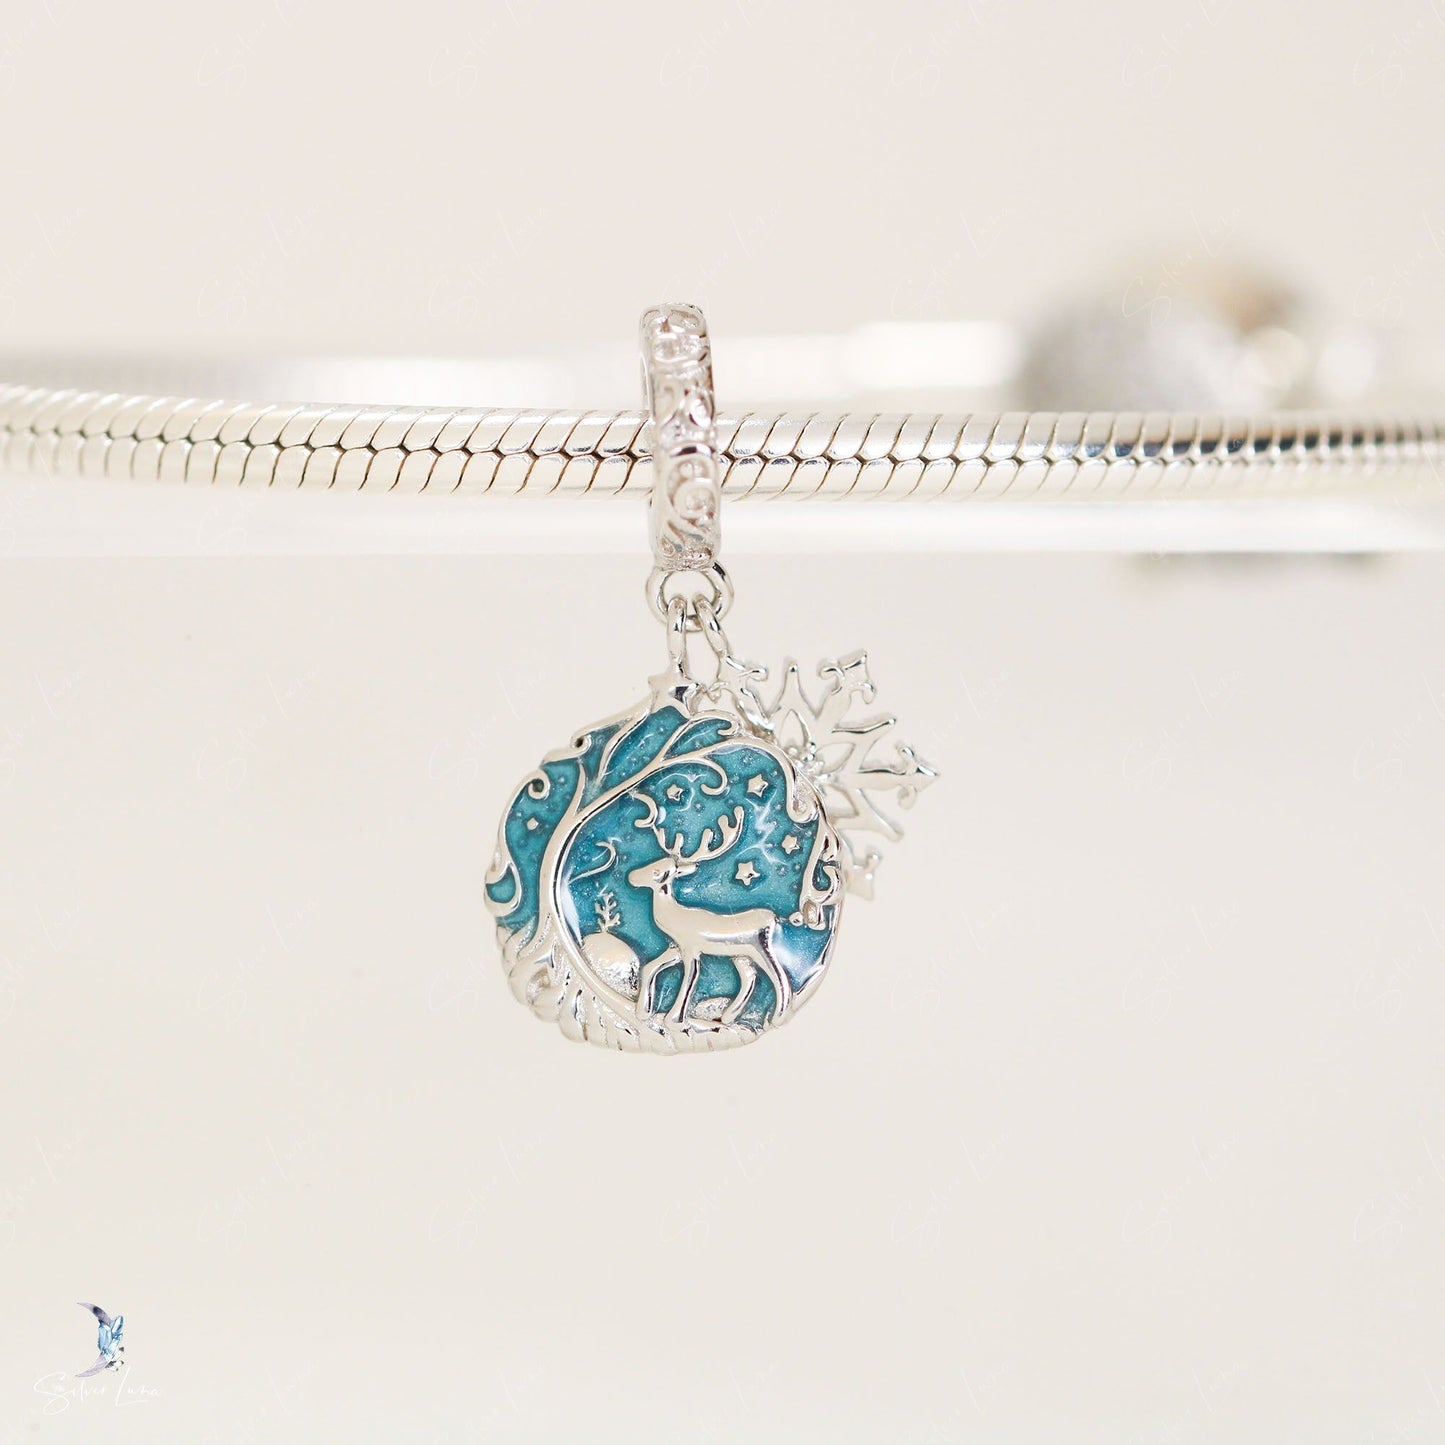 Deer in the snowy forest pendant charm